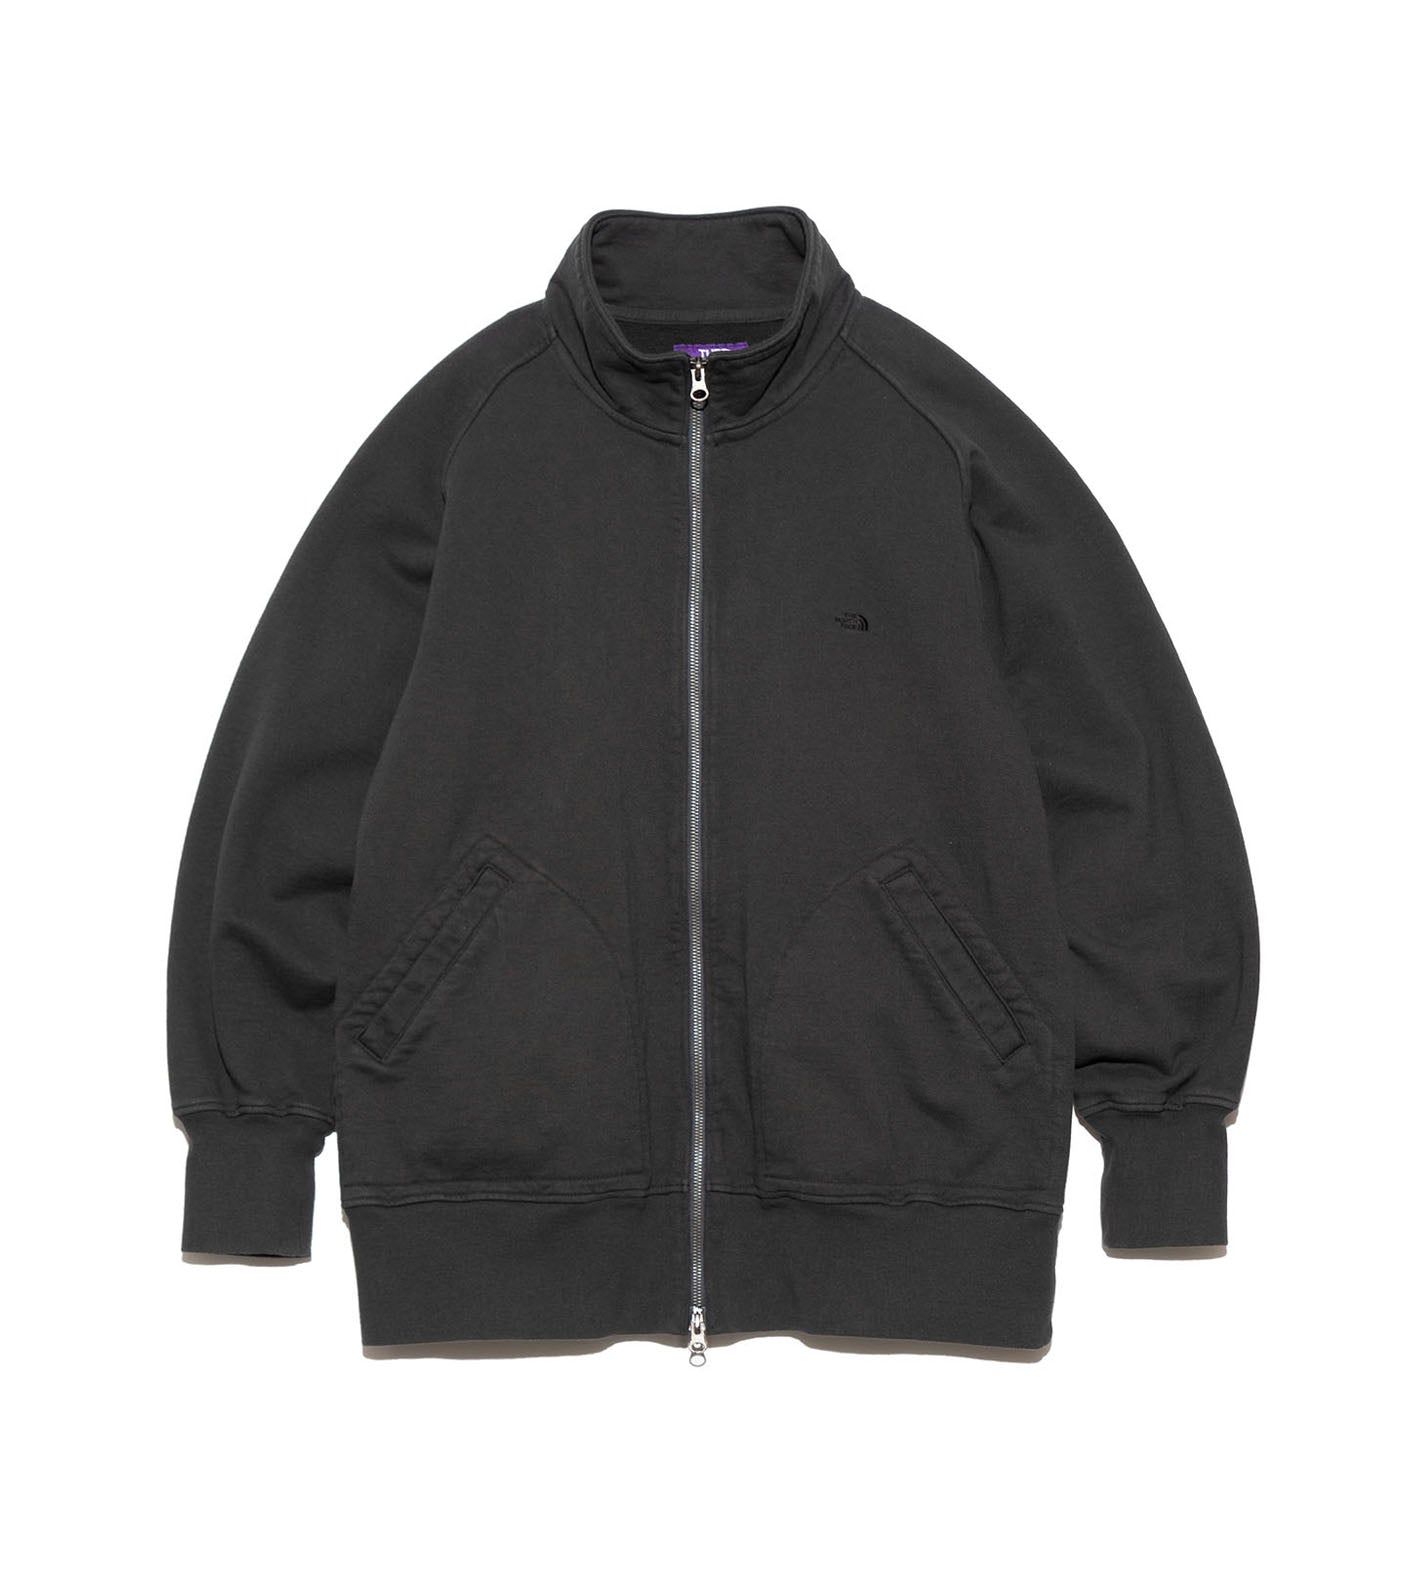 THE NORTH FACE PURPLE LABEL 13oz Zip Up Field Jacket